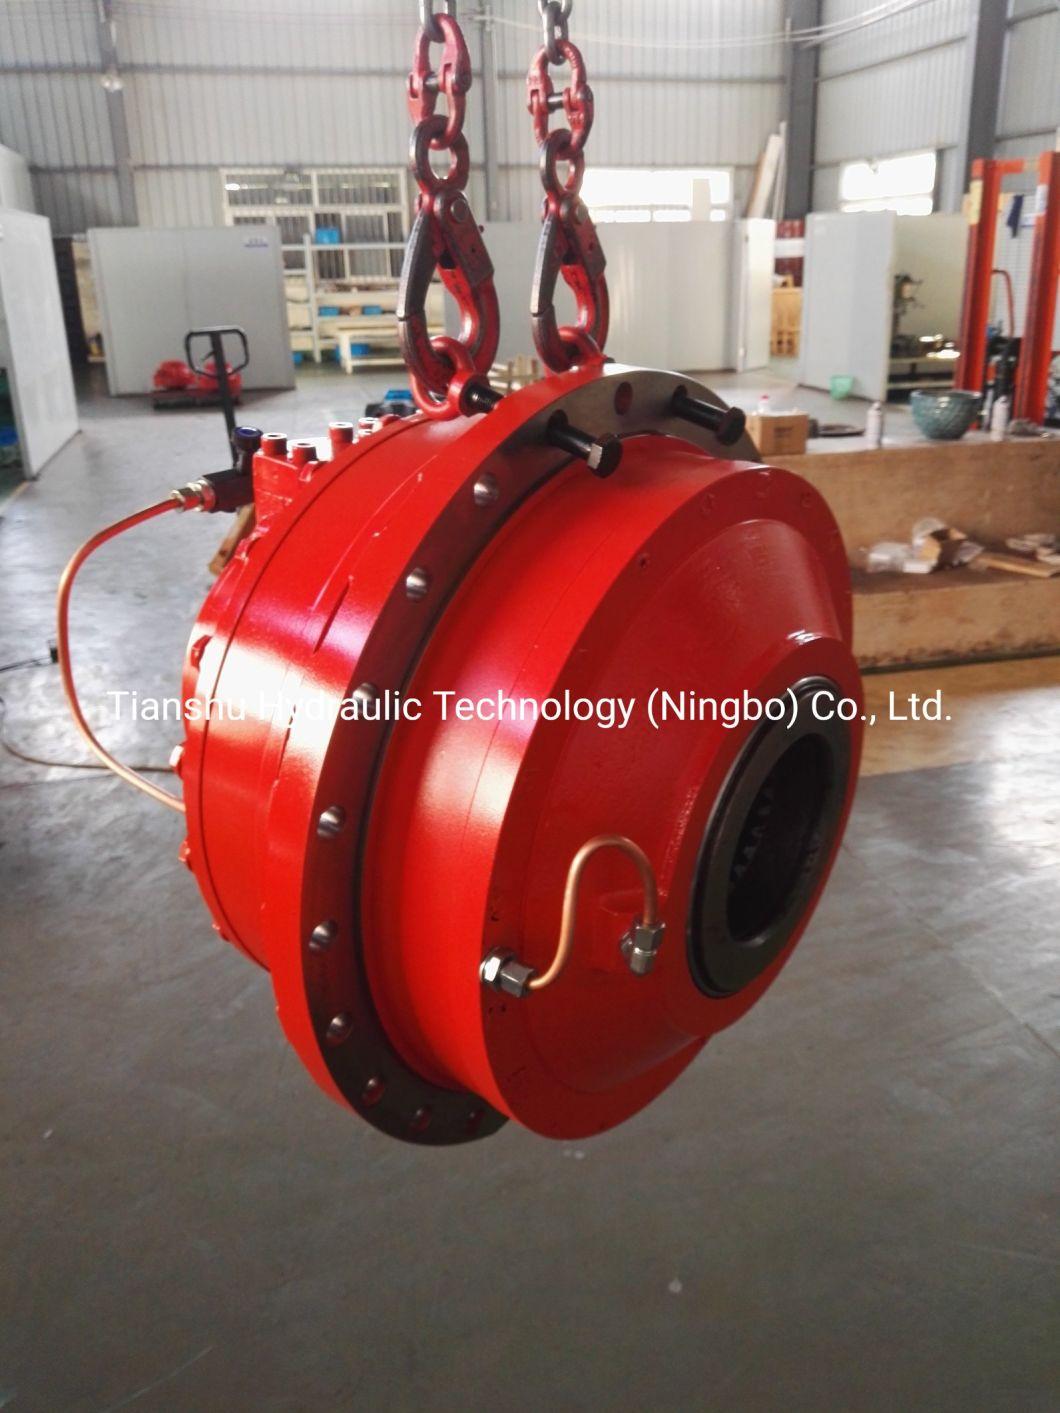 Made in China Good Quality Hagglunds Motor Drives Ca 50/70/100/140/210 Low Speed High Torque Radial Piston Hydraulic Motor